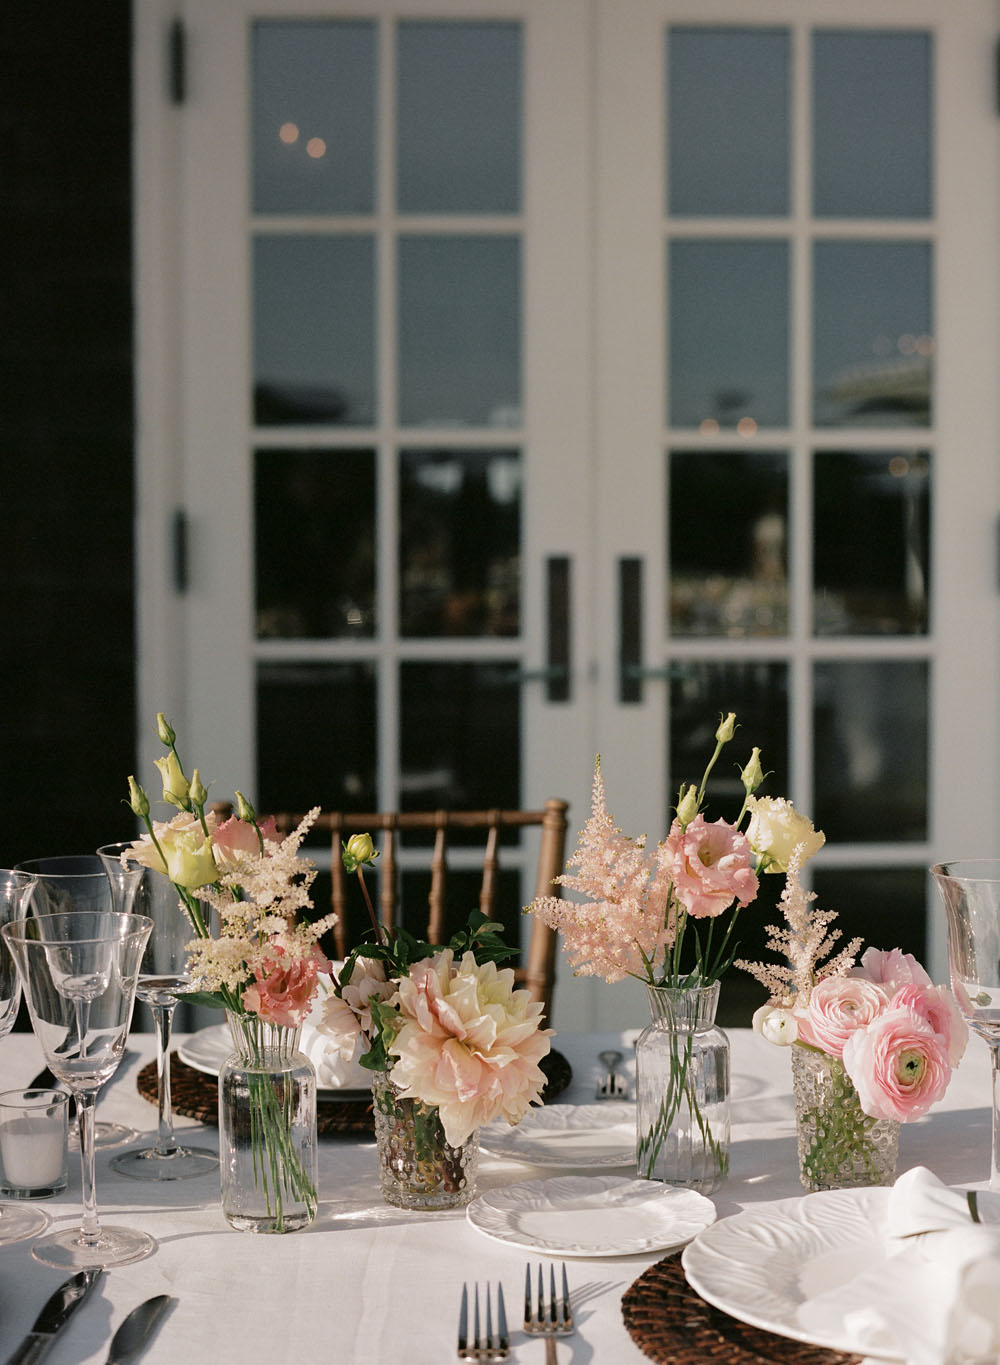 Classic black tie country club wedding in The Hamptons